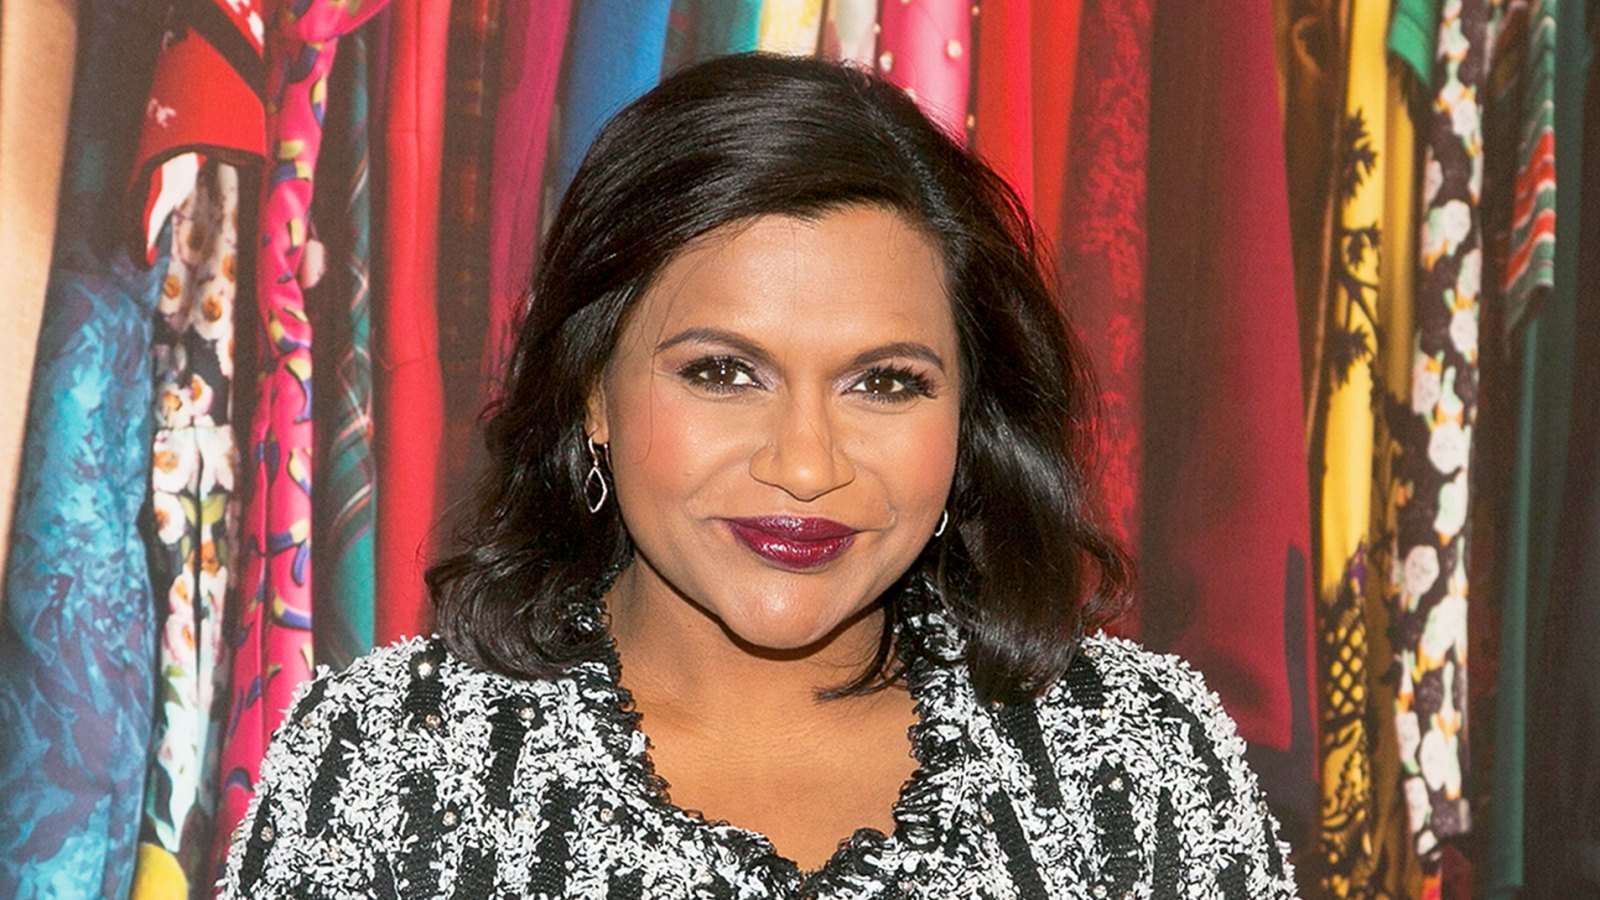 Mindy Kaling arrives for The Paley Center for Media's 11th Annual PaleyFest Fall TV 2017 Previews Los Angeles The CW at The Paley Center in Beverly Hills, California.